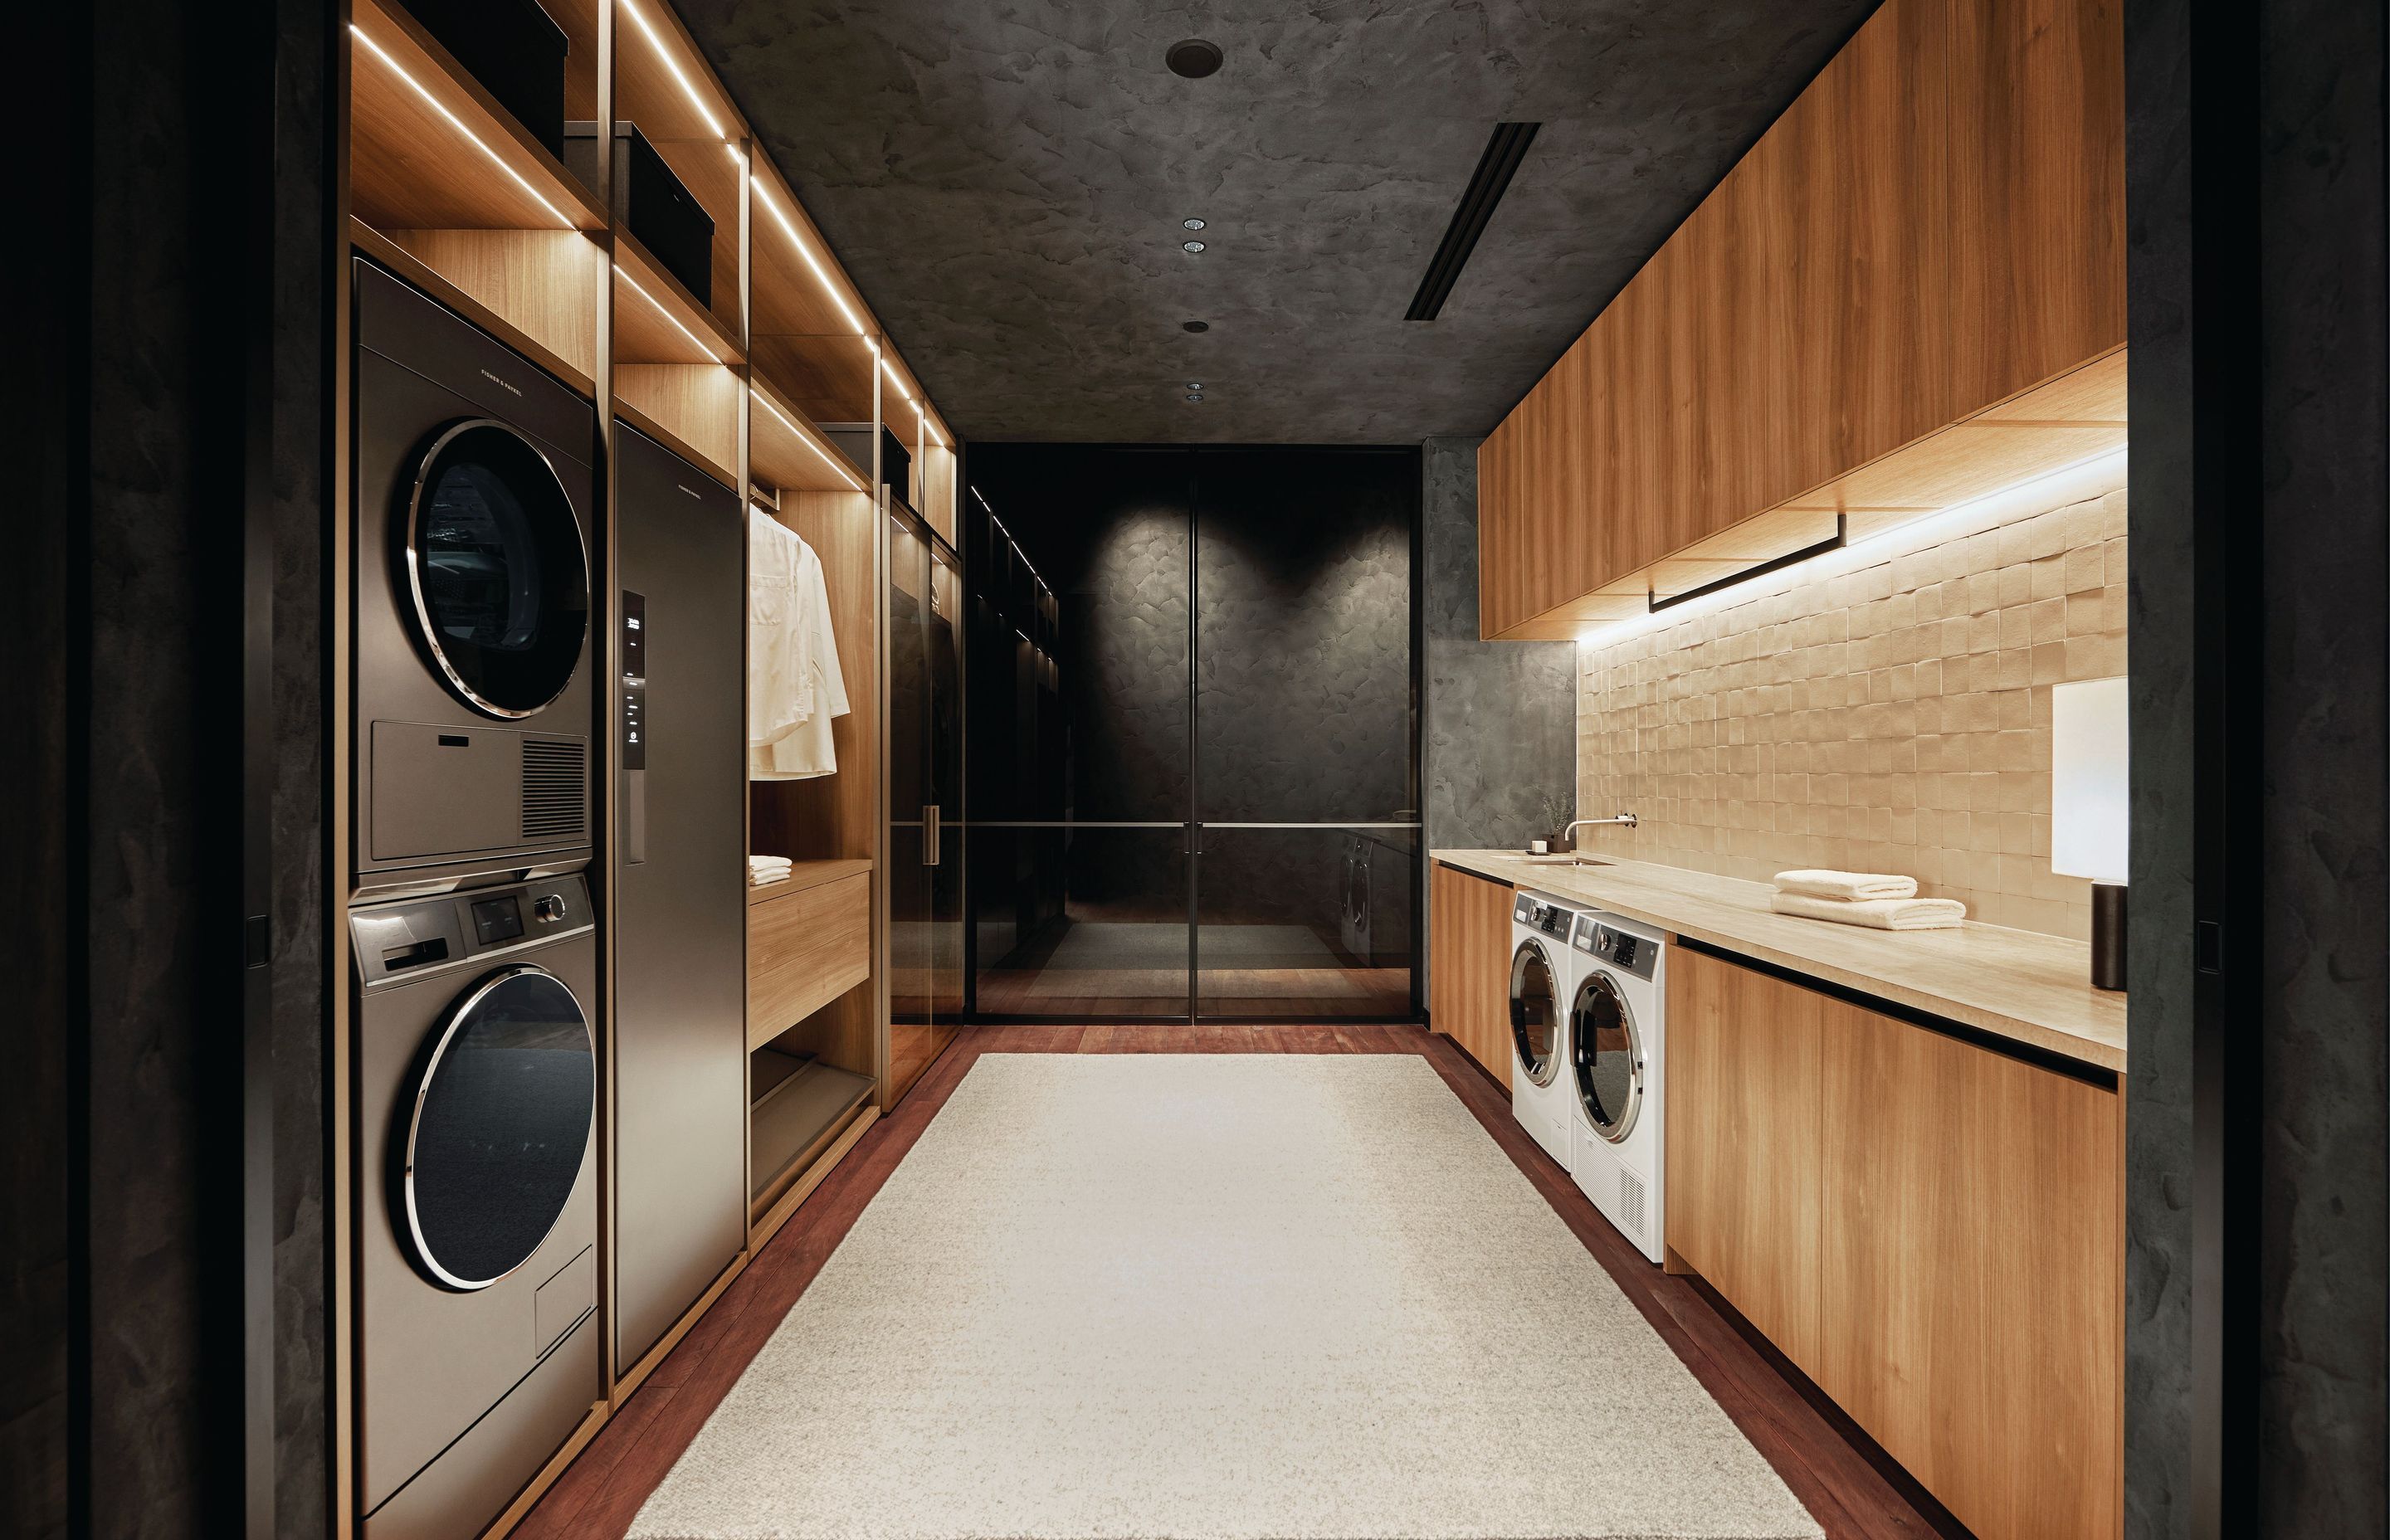 Designed by Boffi, this laundry and wardrobe area balances modern design and domestic functionality.